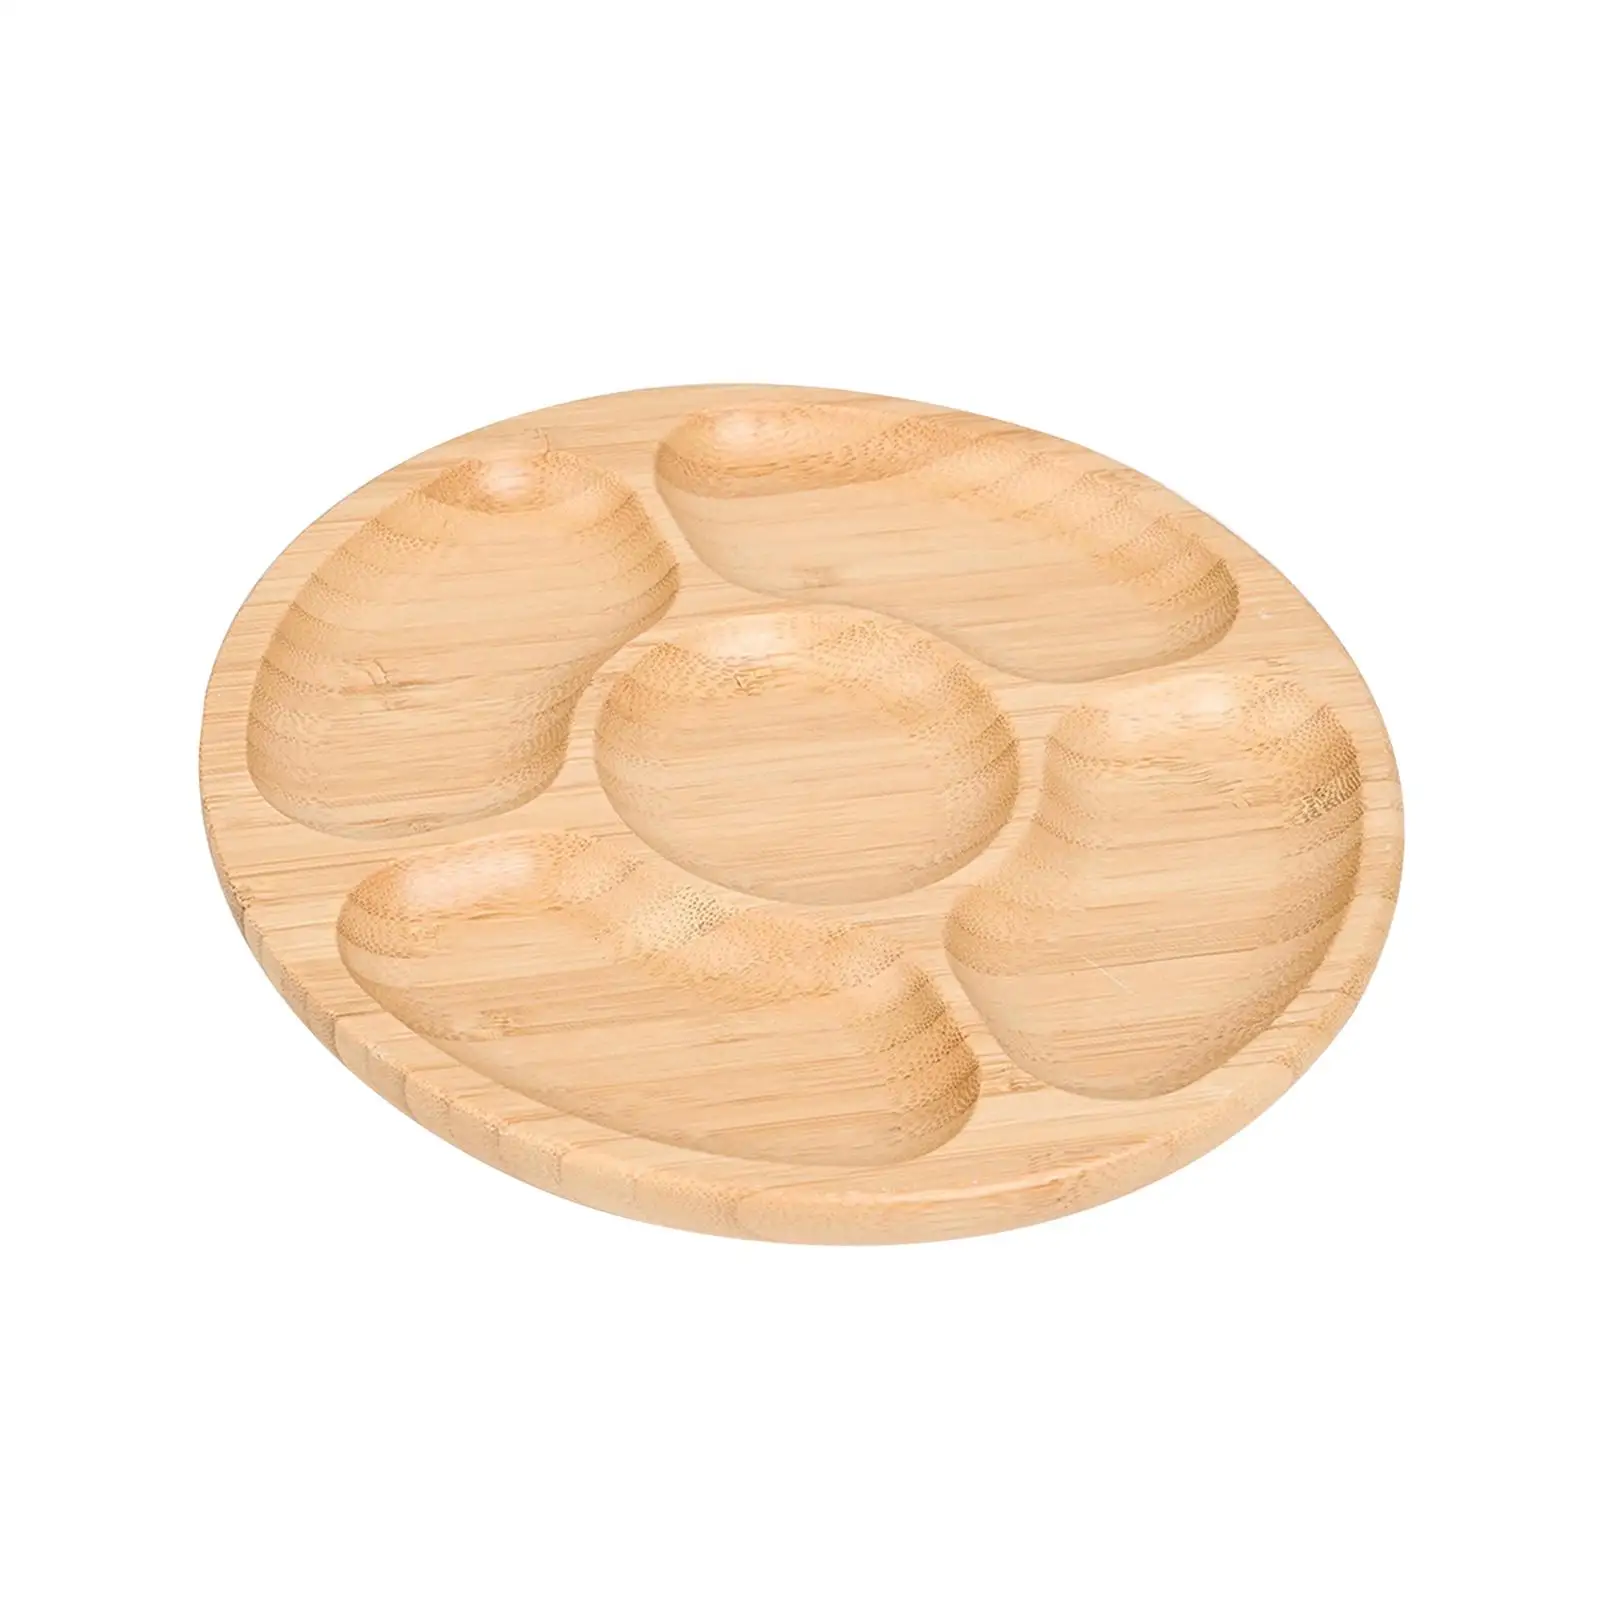 Wooden Tray Divided Cookware Round Shaped with 5 Compartments Wooden Food Tray Round Tray for Party Pastry Candies Wedding